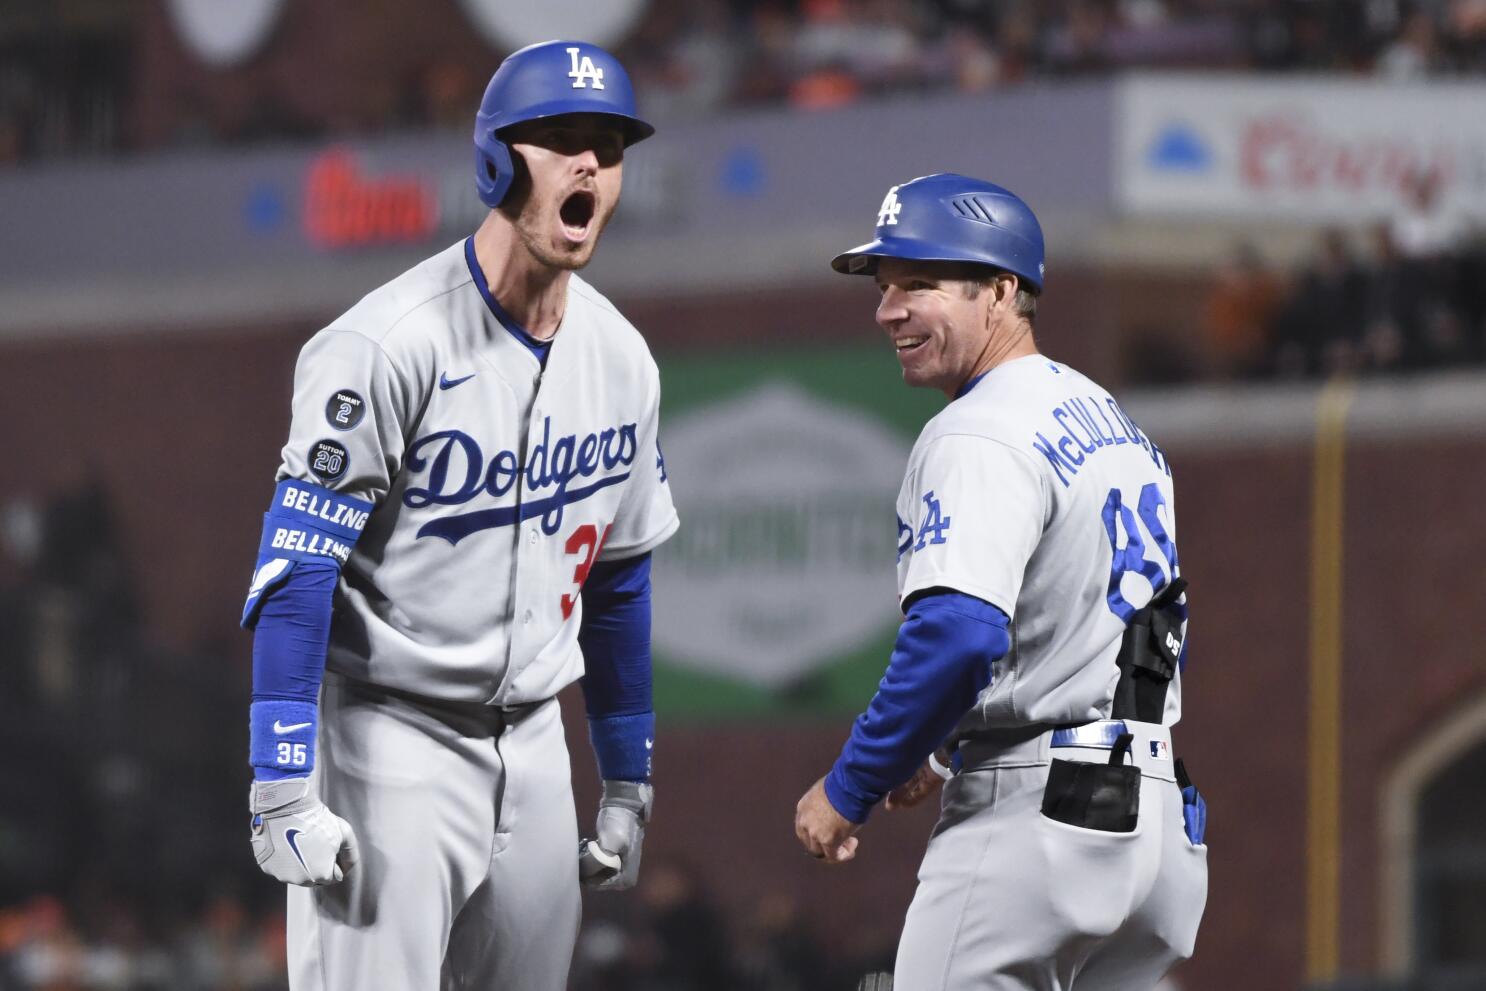 A California dream series: Giants-Dodgers rivalry comes to the playoffs  with epic stakes